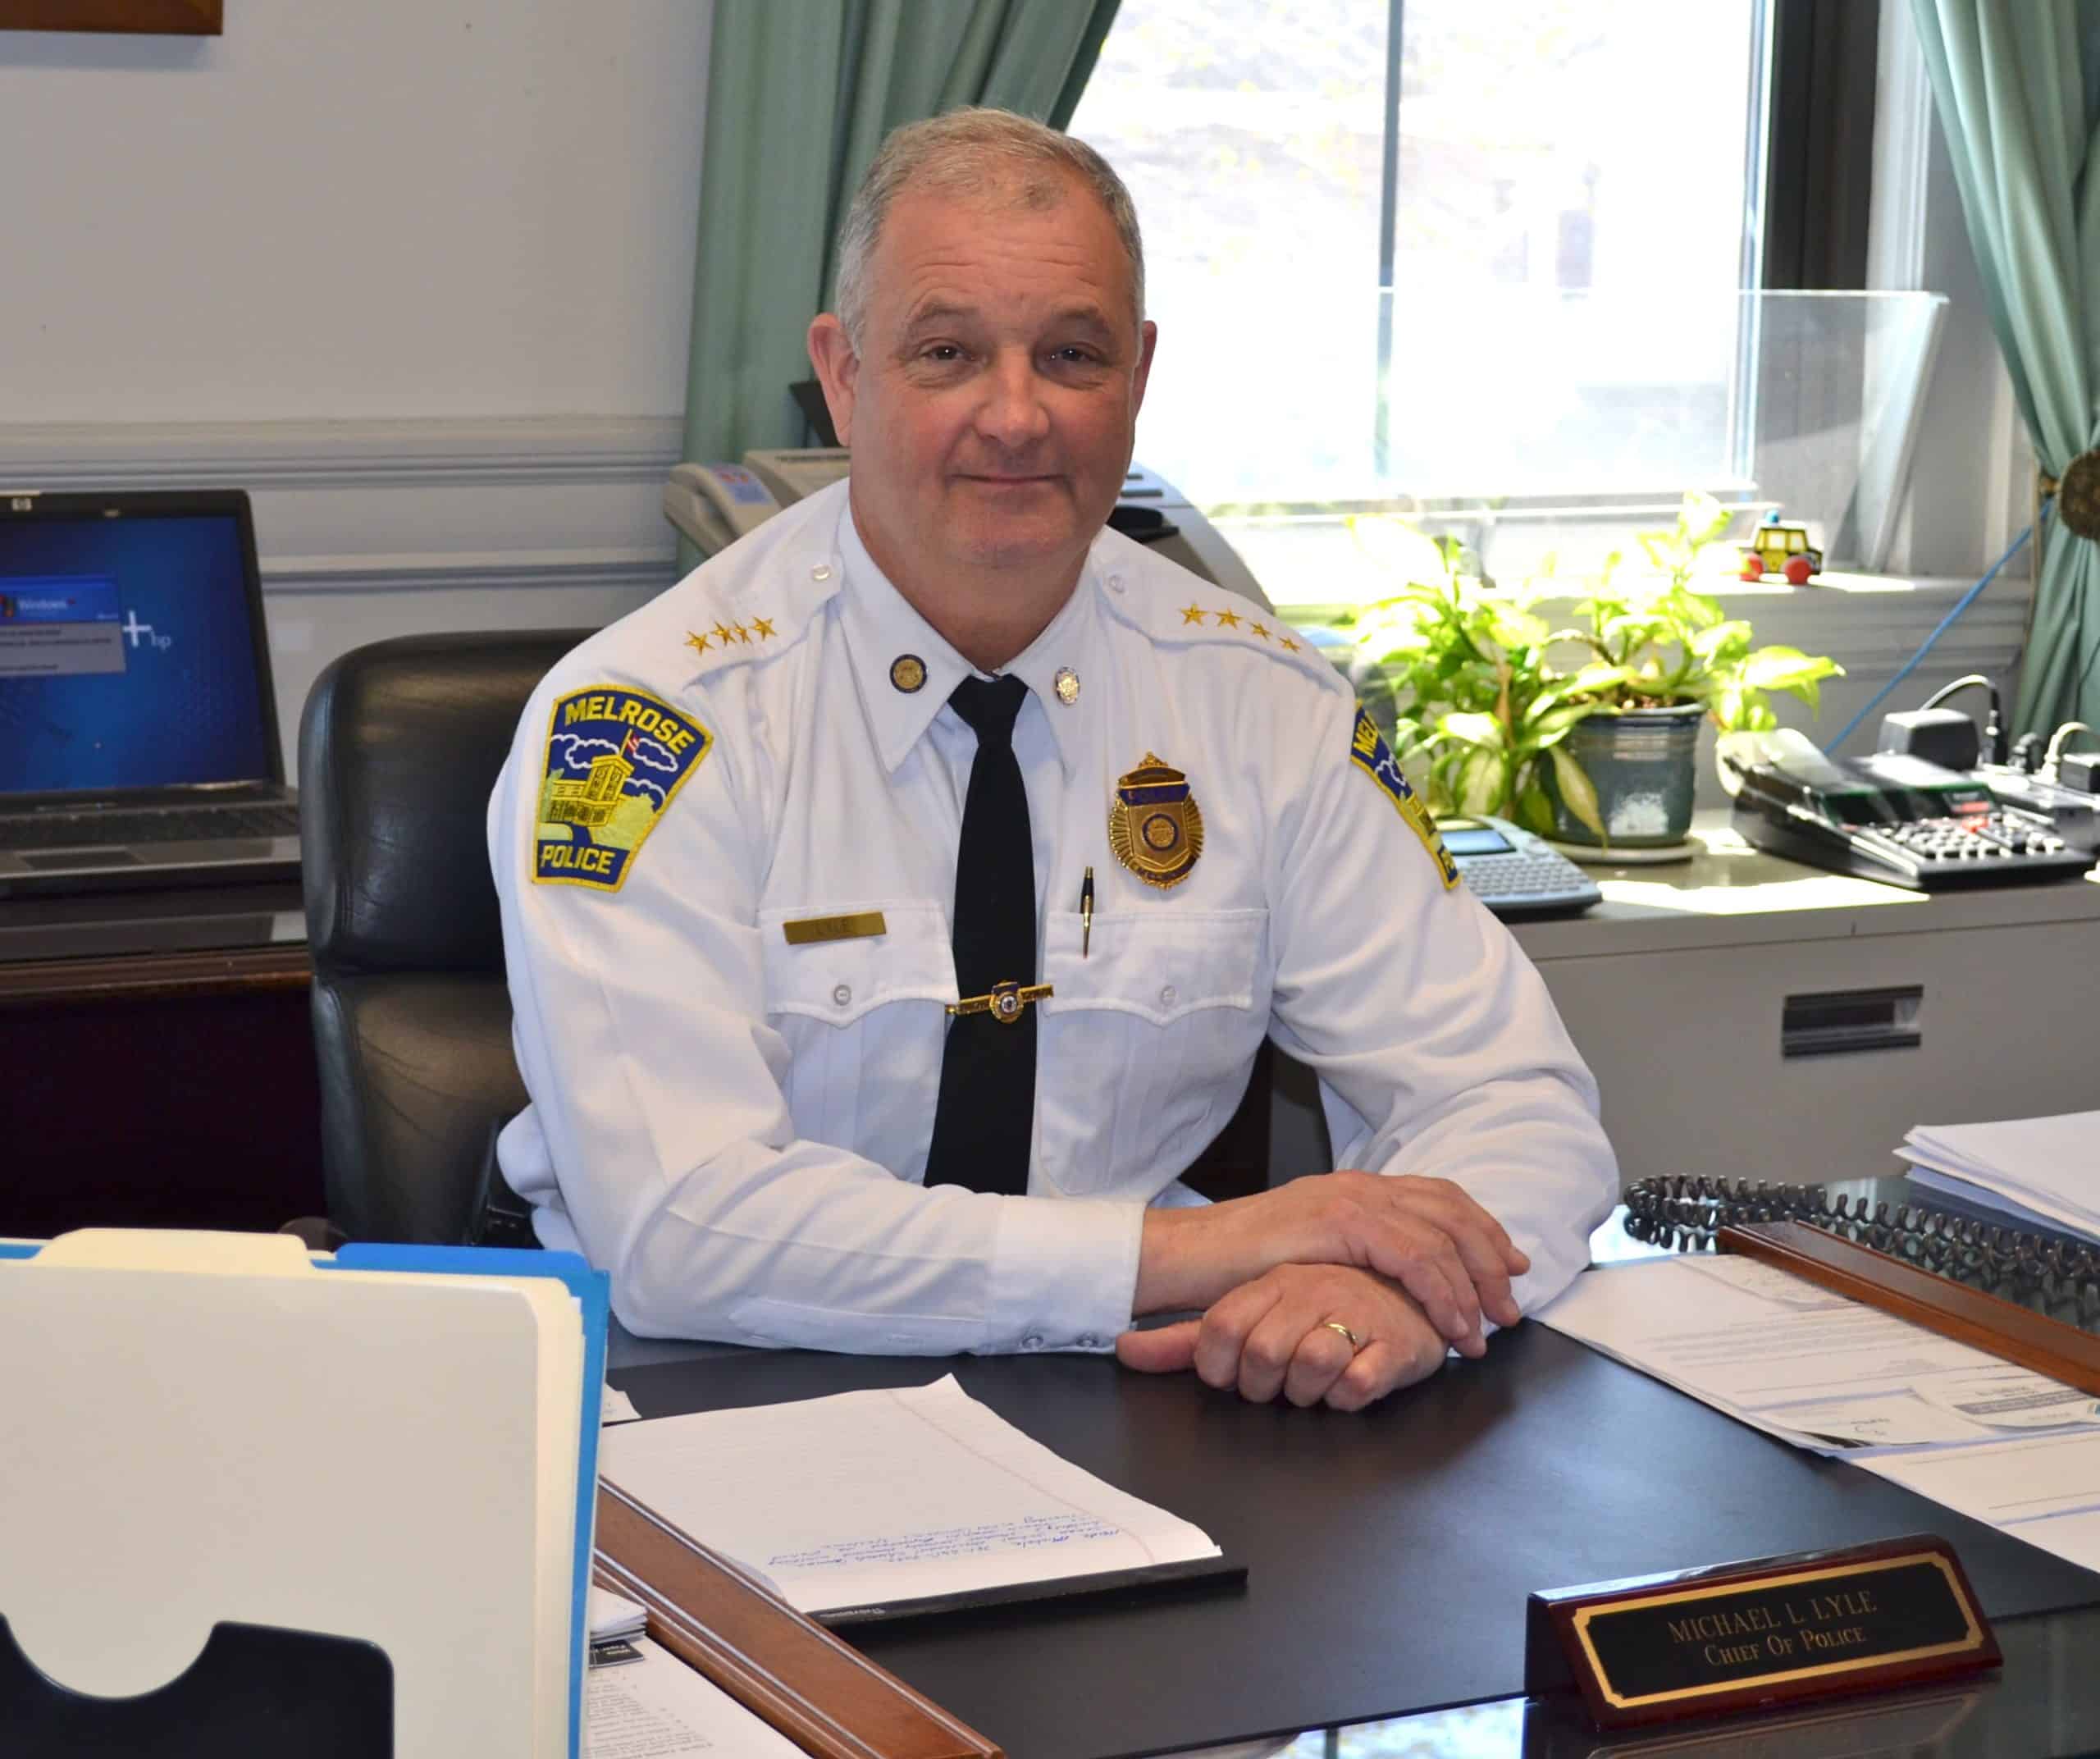 Melrose Police Chief Michael L. Lyle